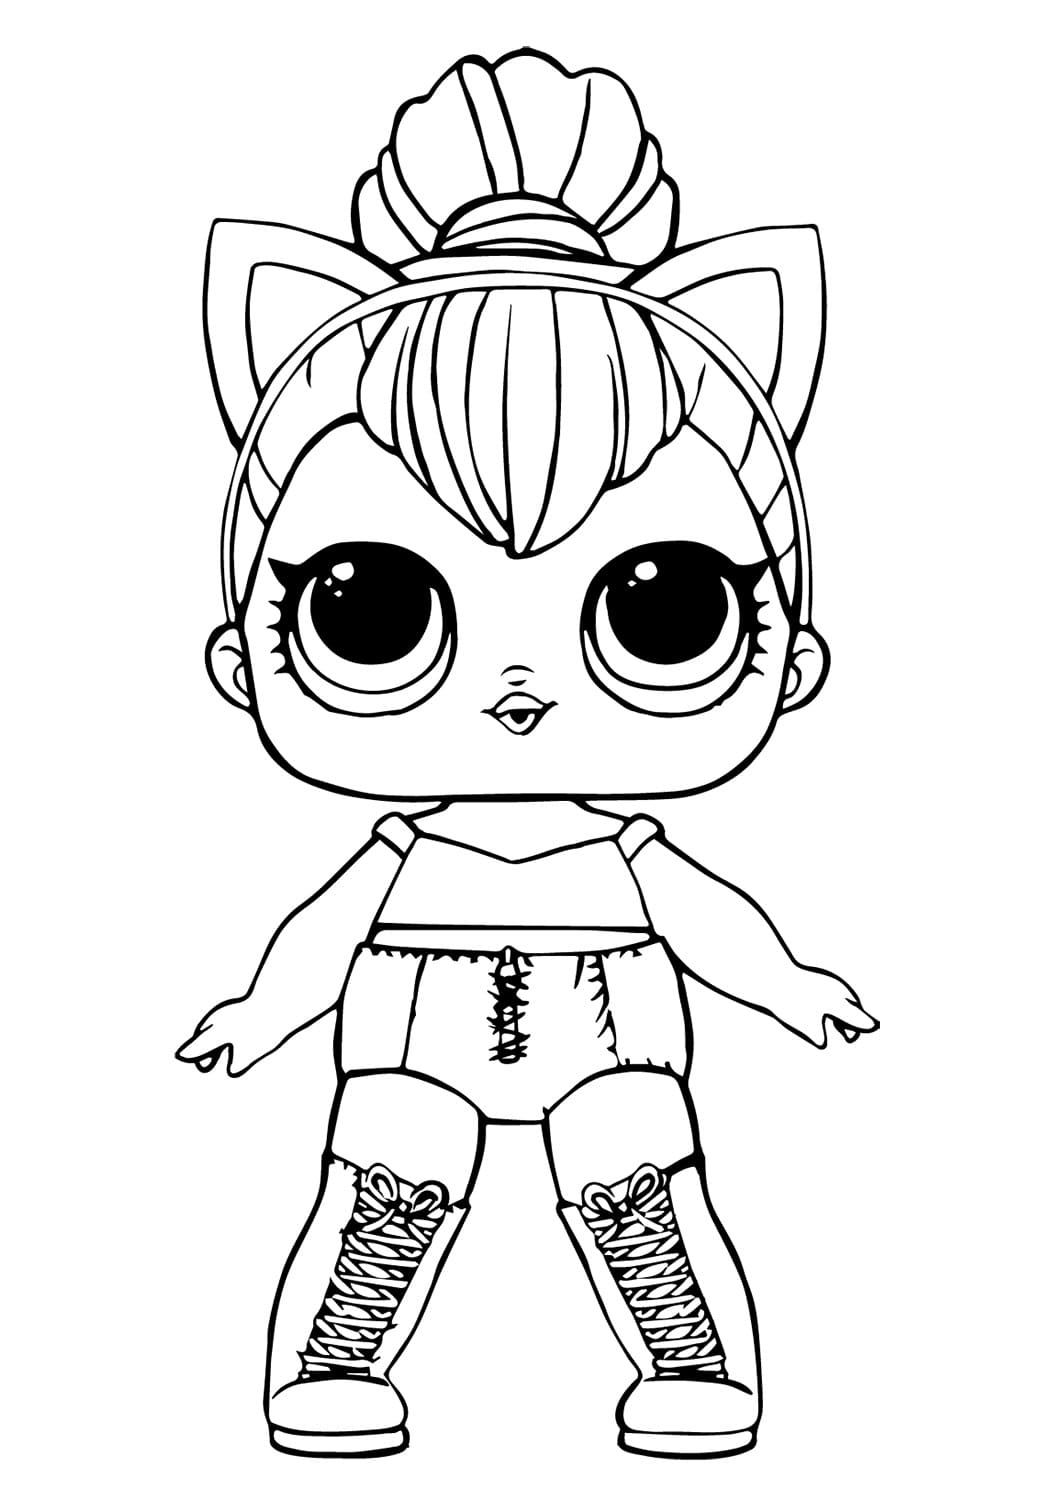 Kitty Queen Lol Surprise Doll